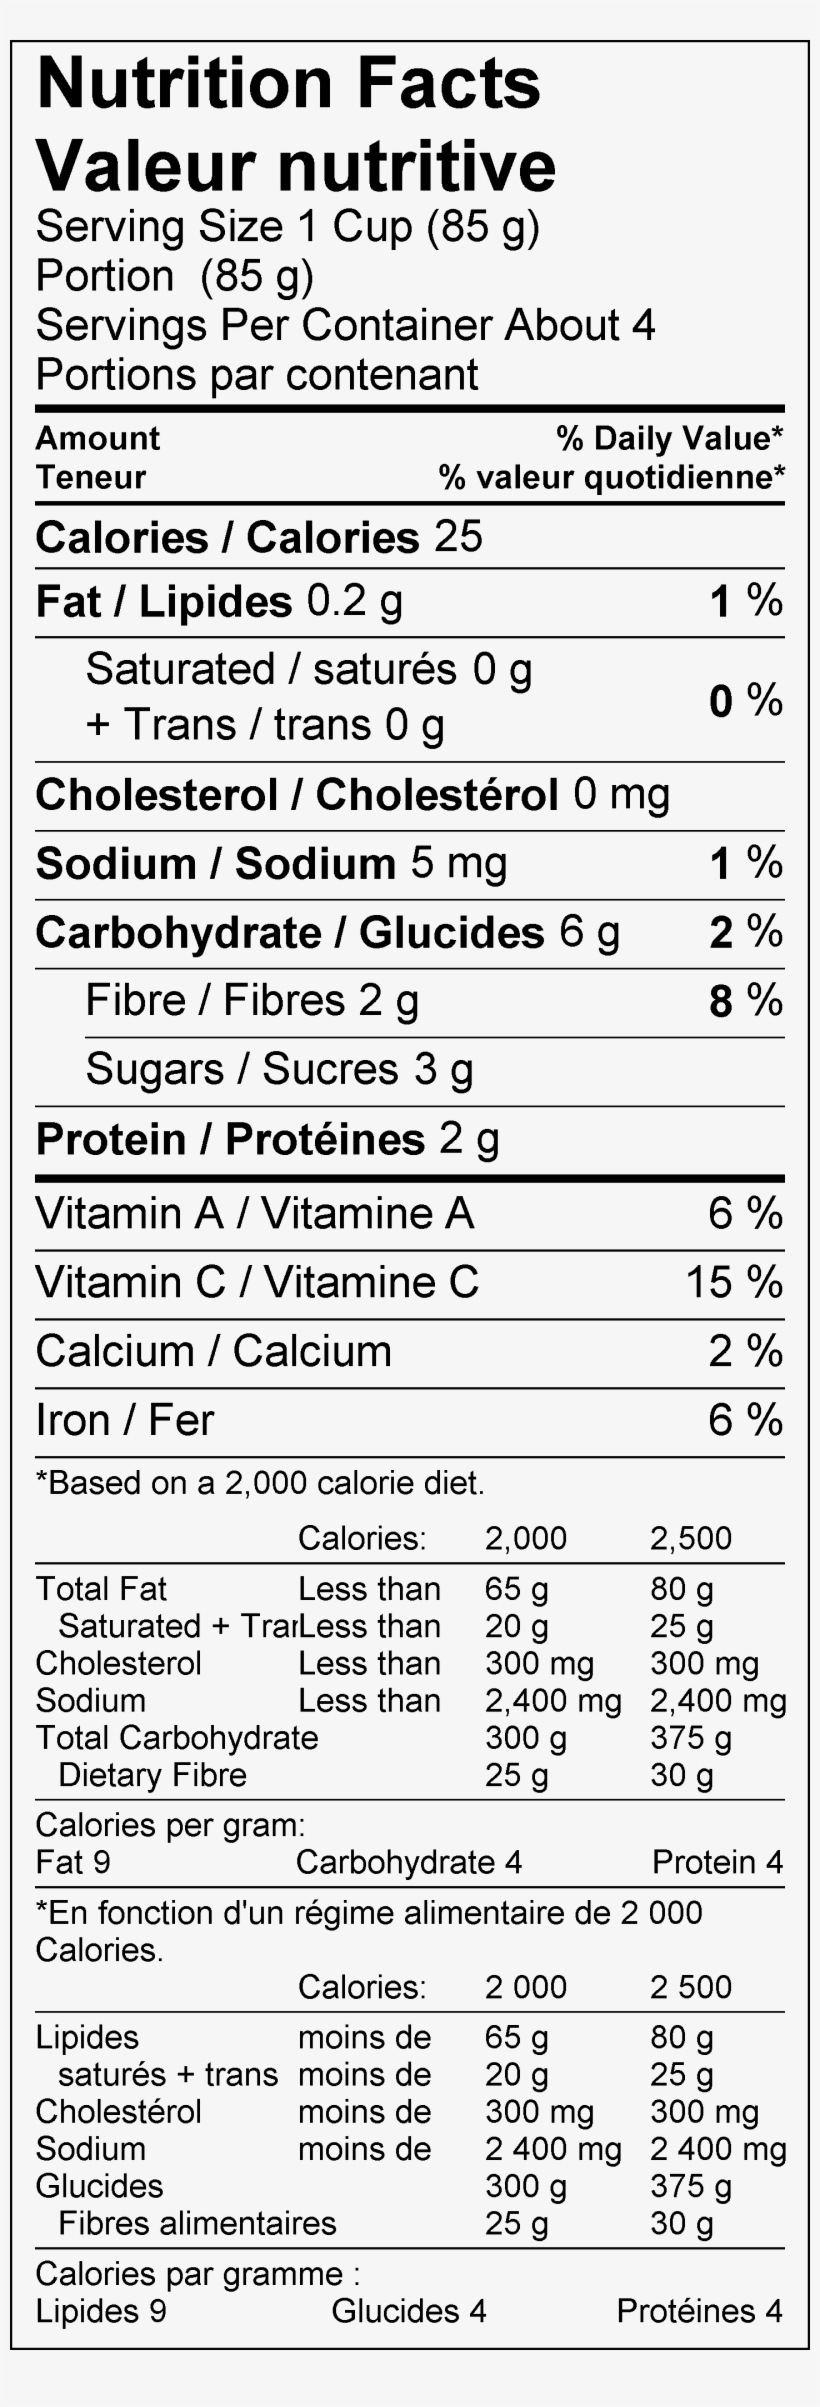 Organic Green Beans - Dried Legume Beans Nutrition Facts, transparent png #1759601